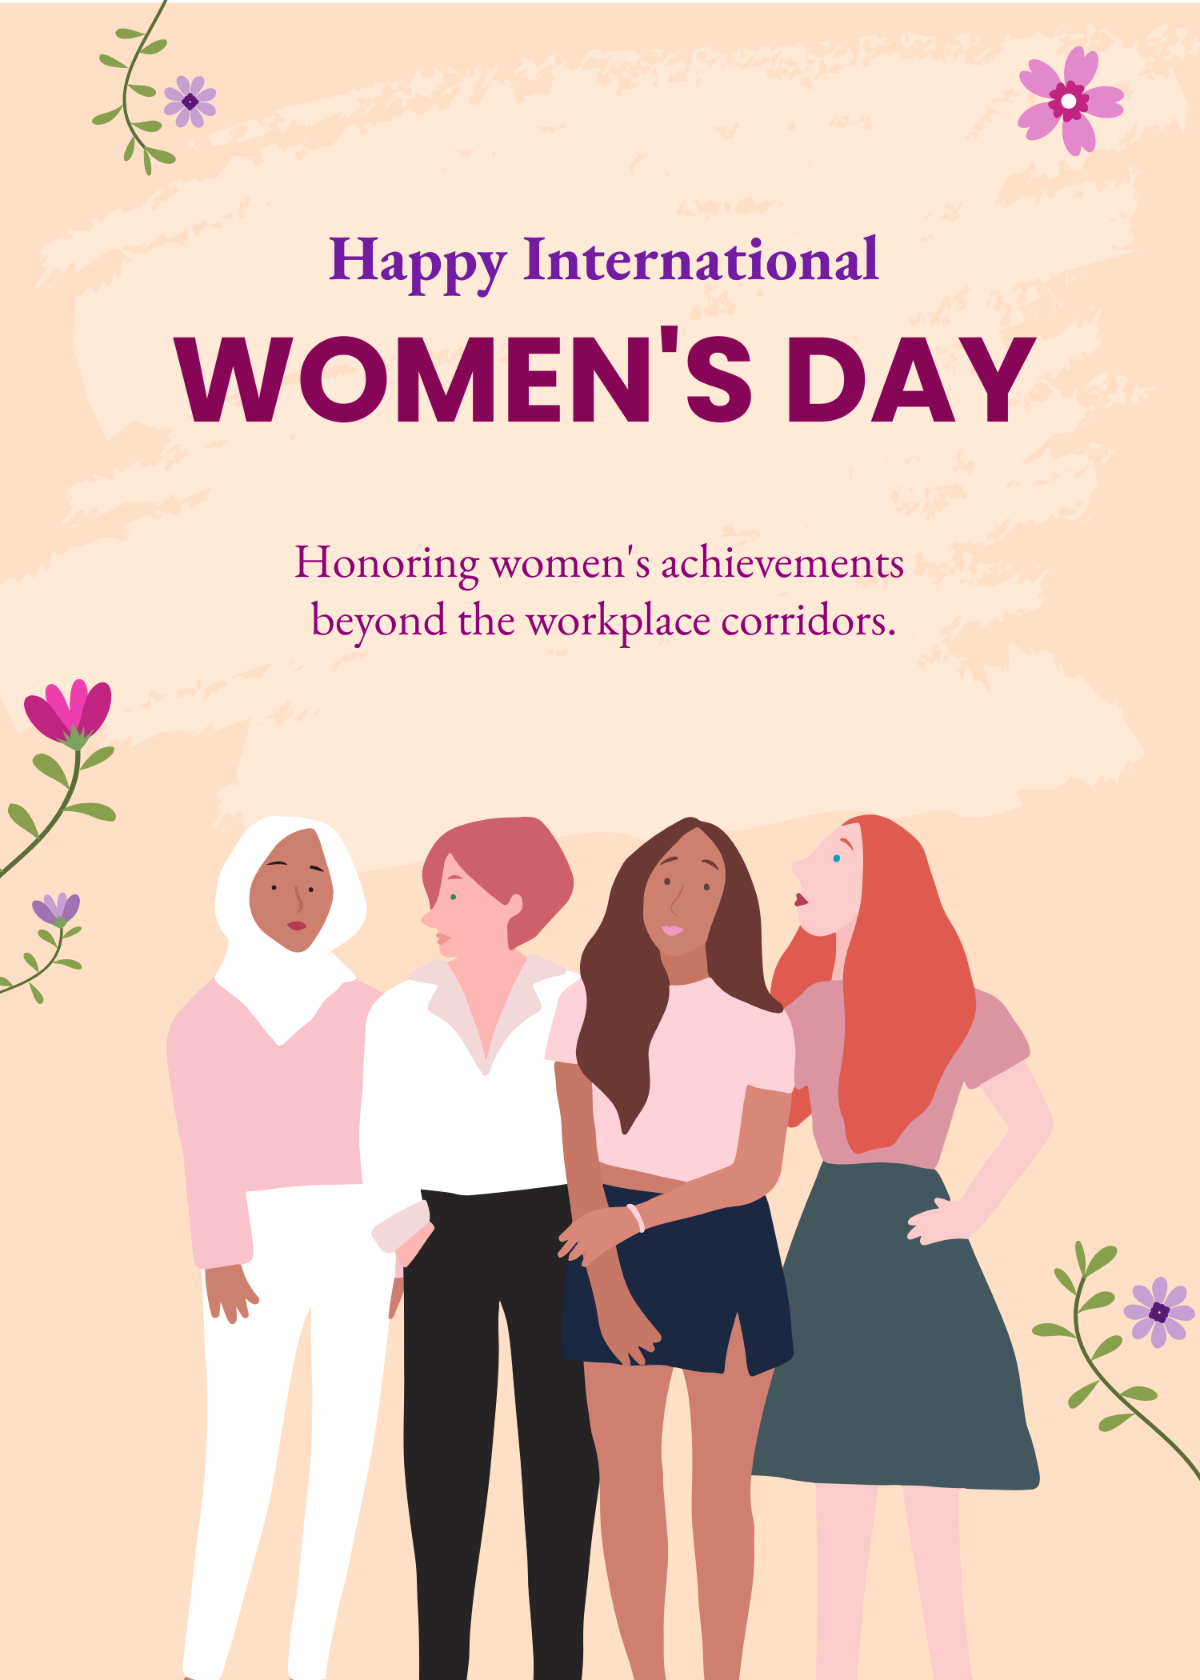 International Women's Day Wishes to Colleagues Template